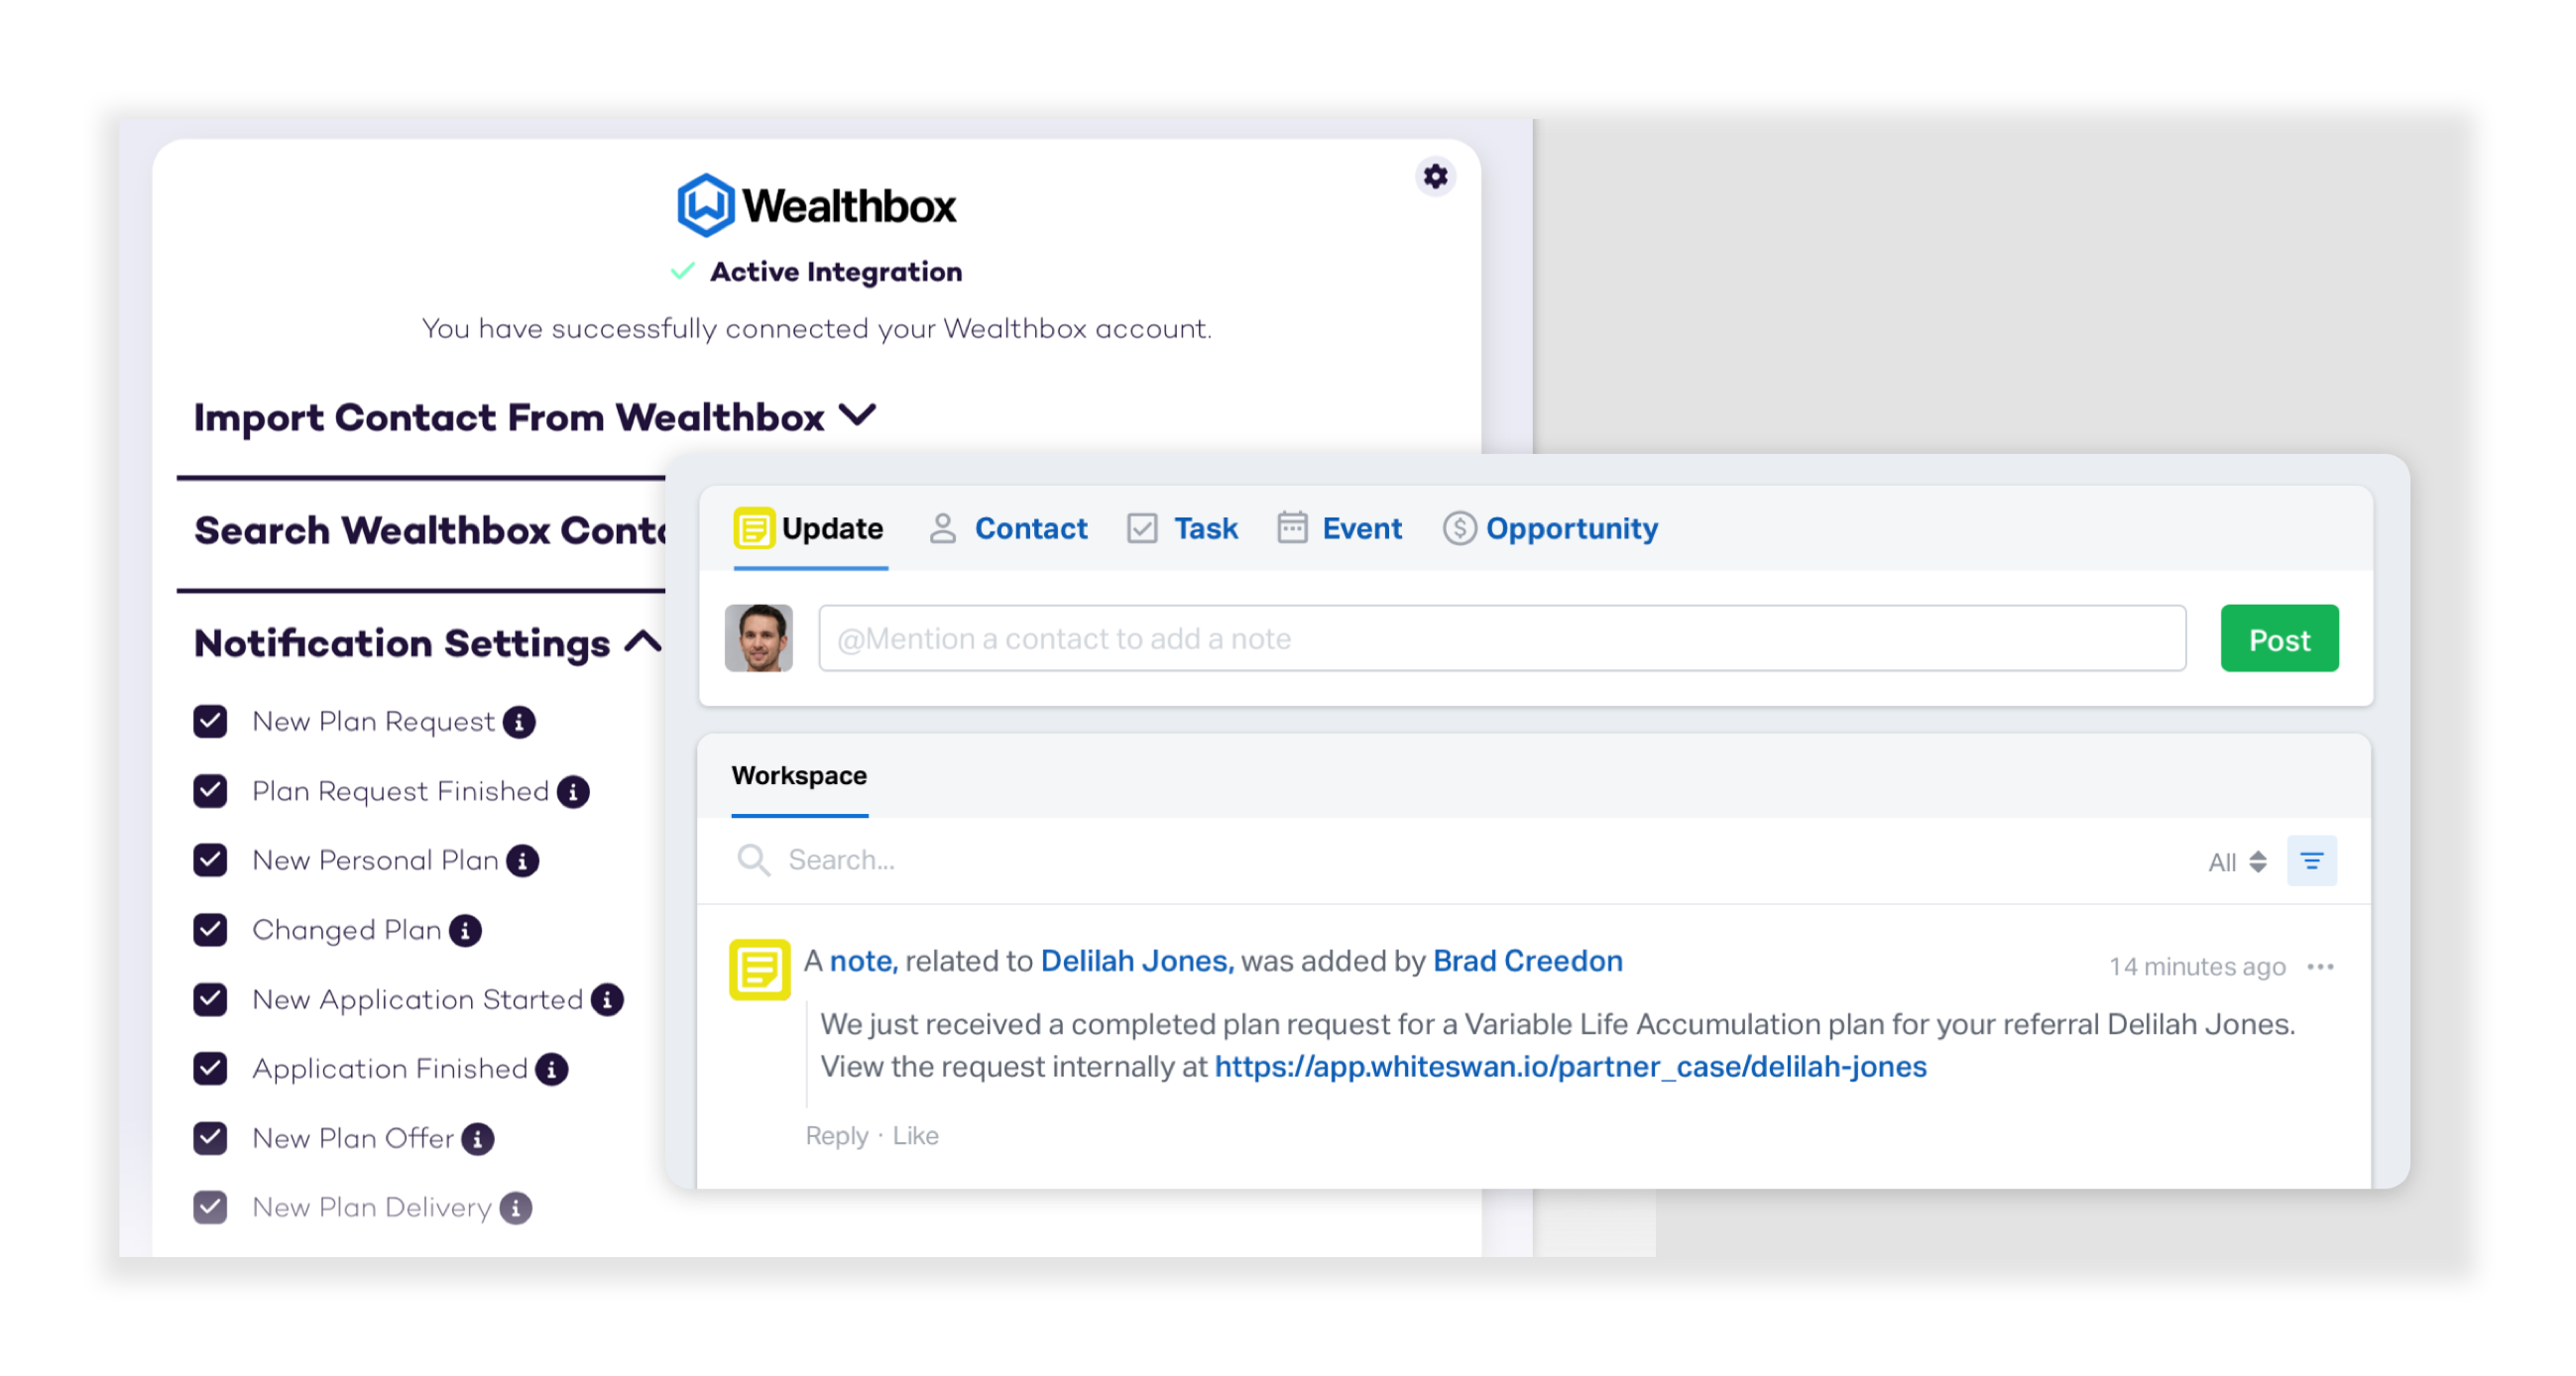 Notes are posted to Wealthbox for plan requests, case progress, earnings events, and more. Notifications may be enabled/disabled from your White Swan partner dashboard.